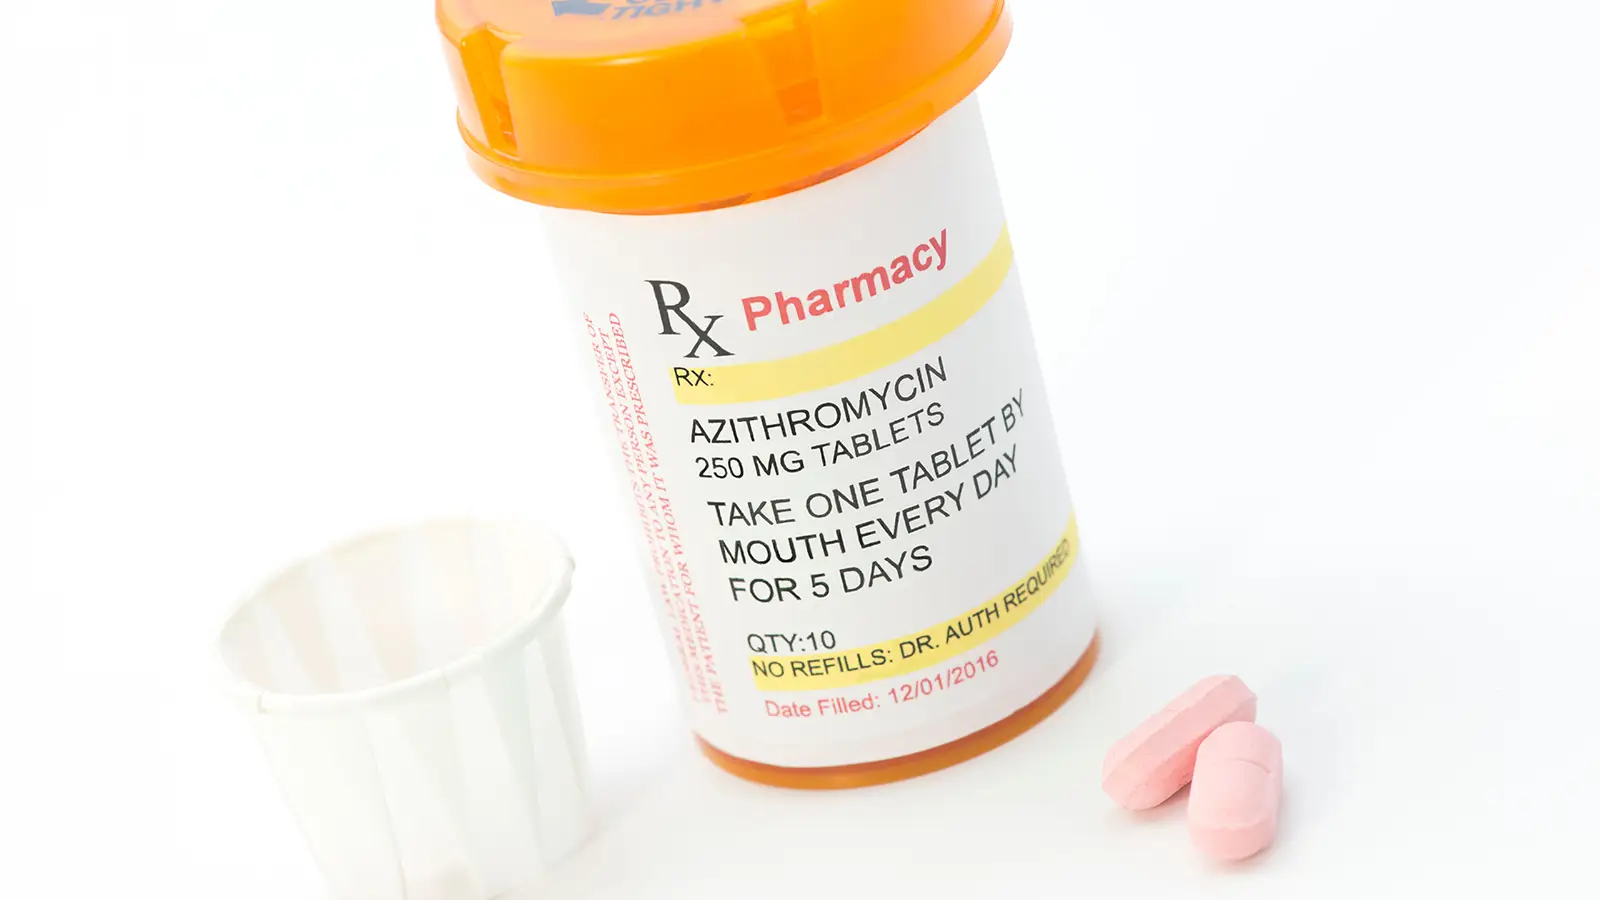 Azithromycin and Pregnancy: What You Should Know